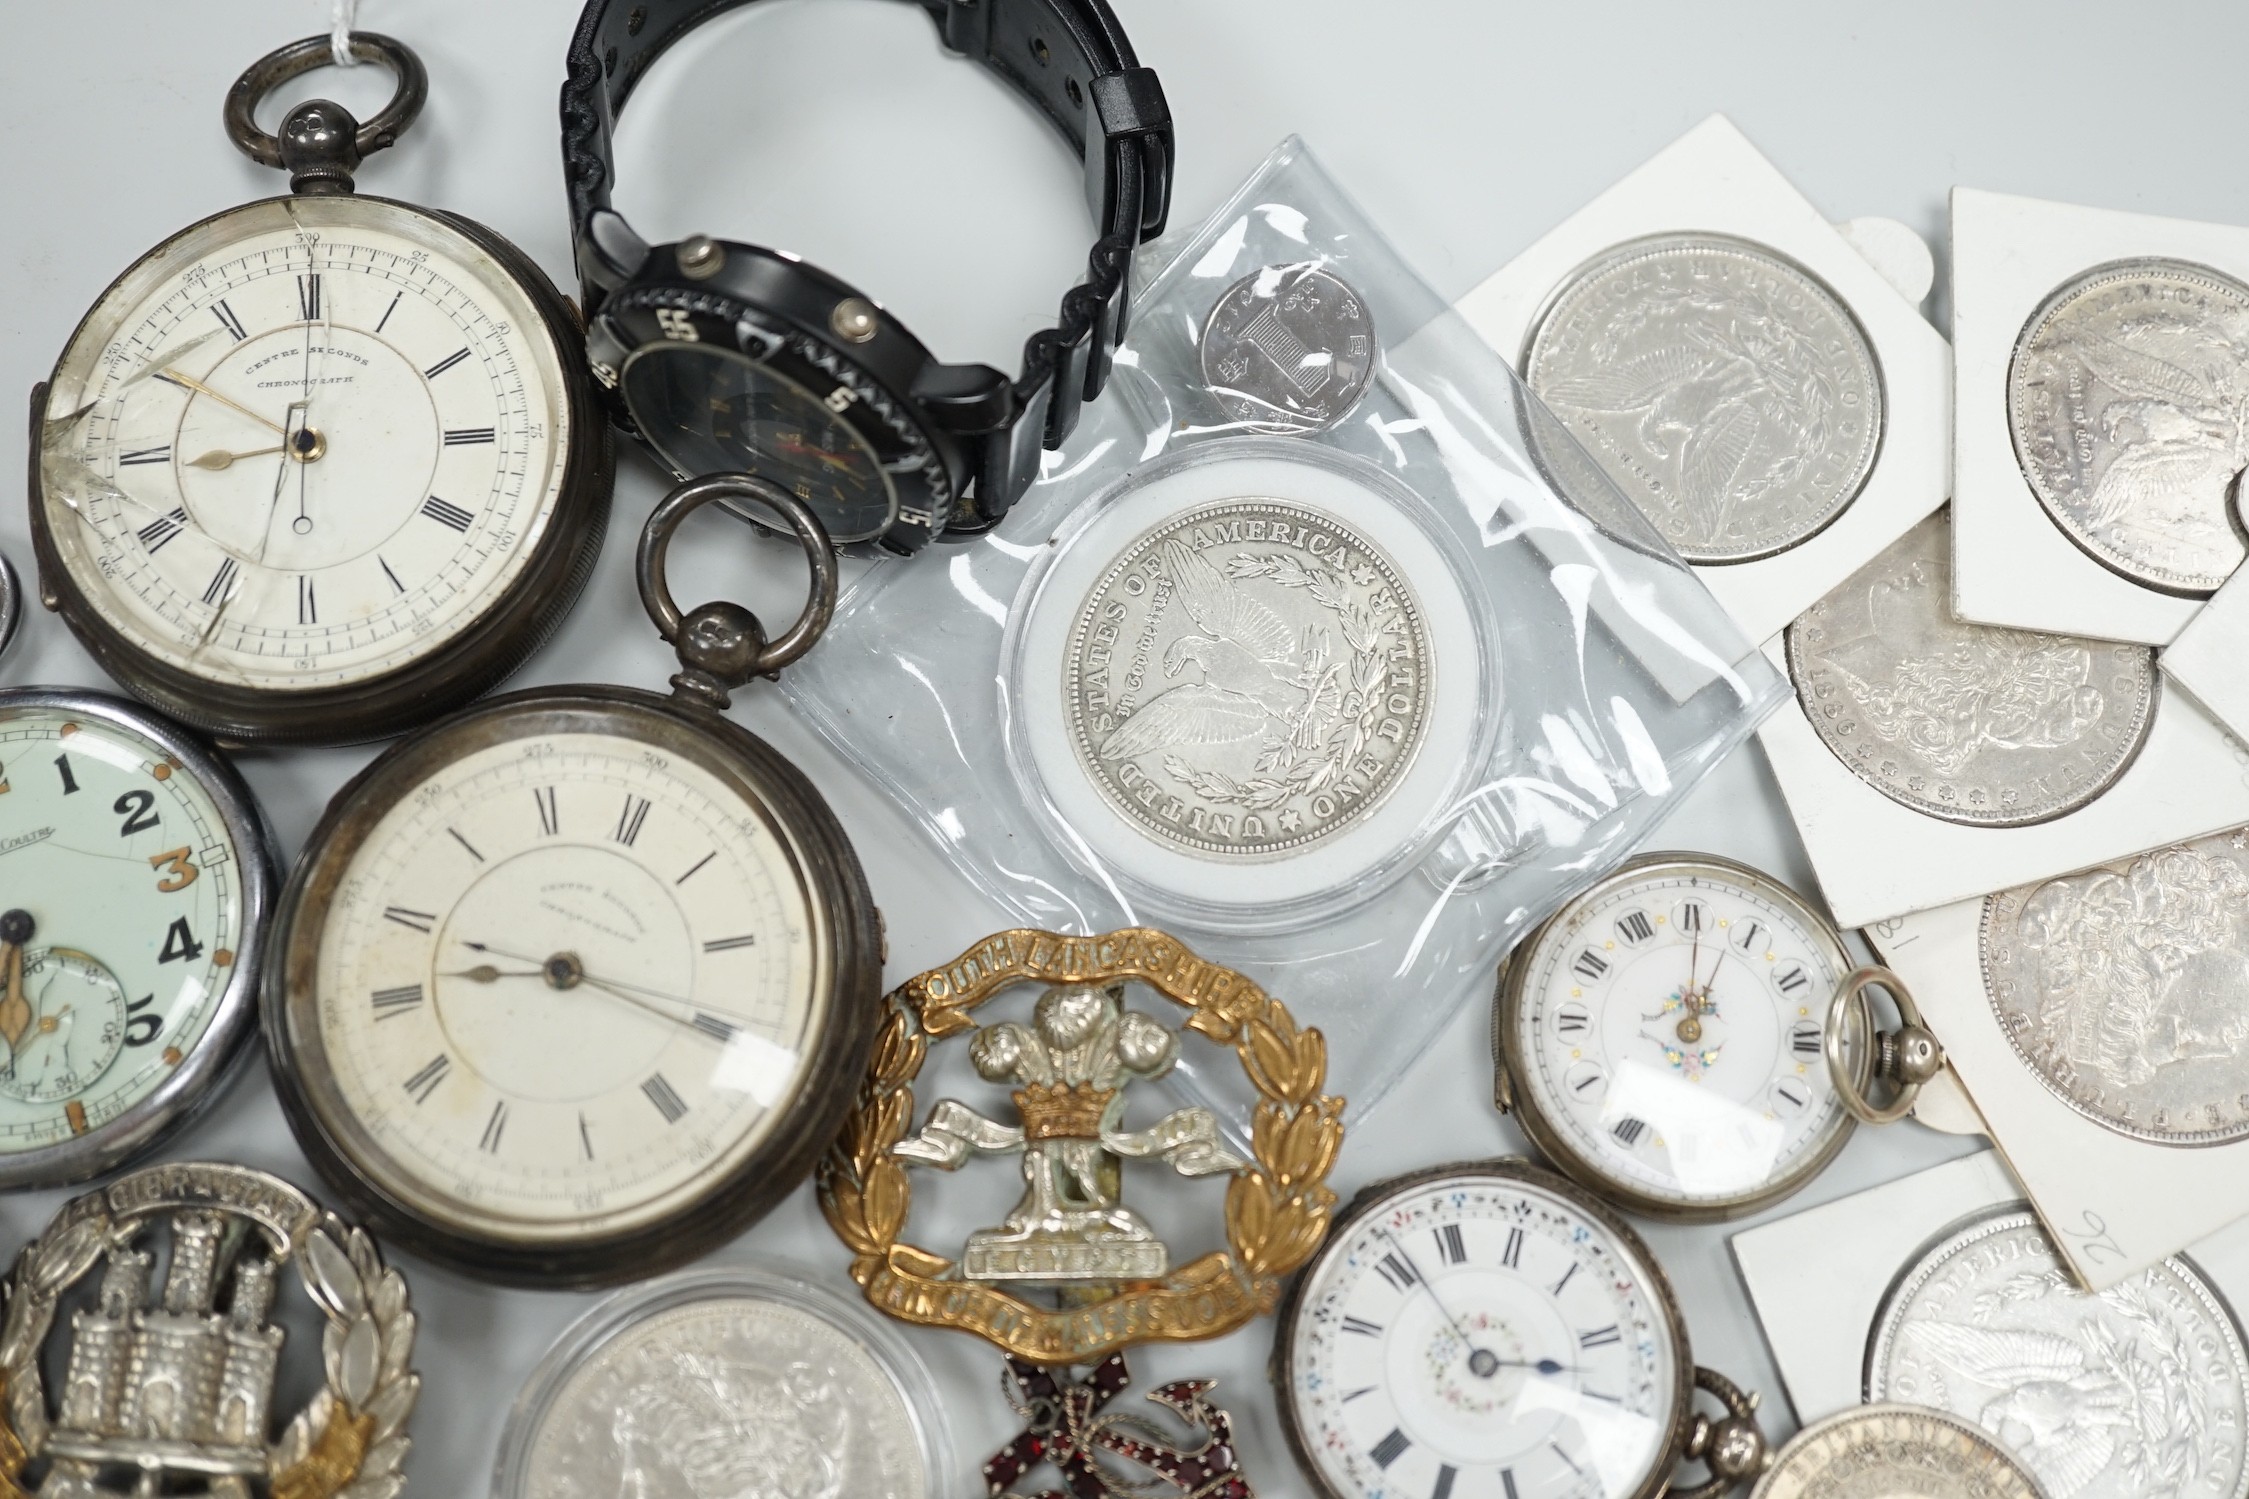 Assorted collectable items, including two silver open faced chronograph pocket watch, a chrome cased military Jaeger LeCoultre pocket watch, two wrist watches, two fob watches, assorted coins including US dollars, cap ba